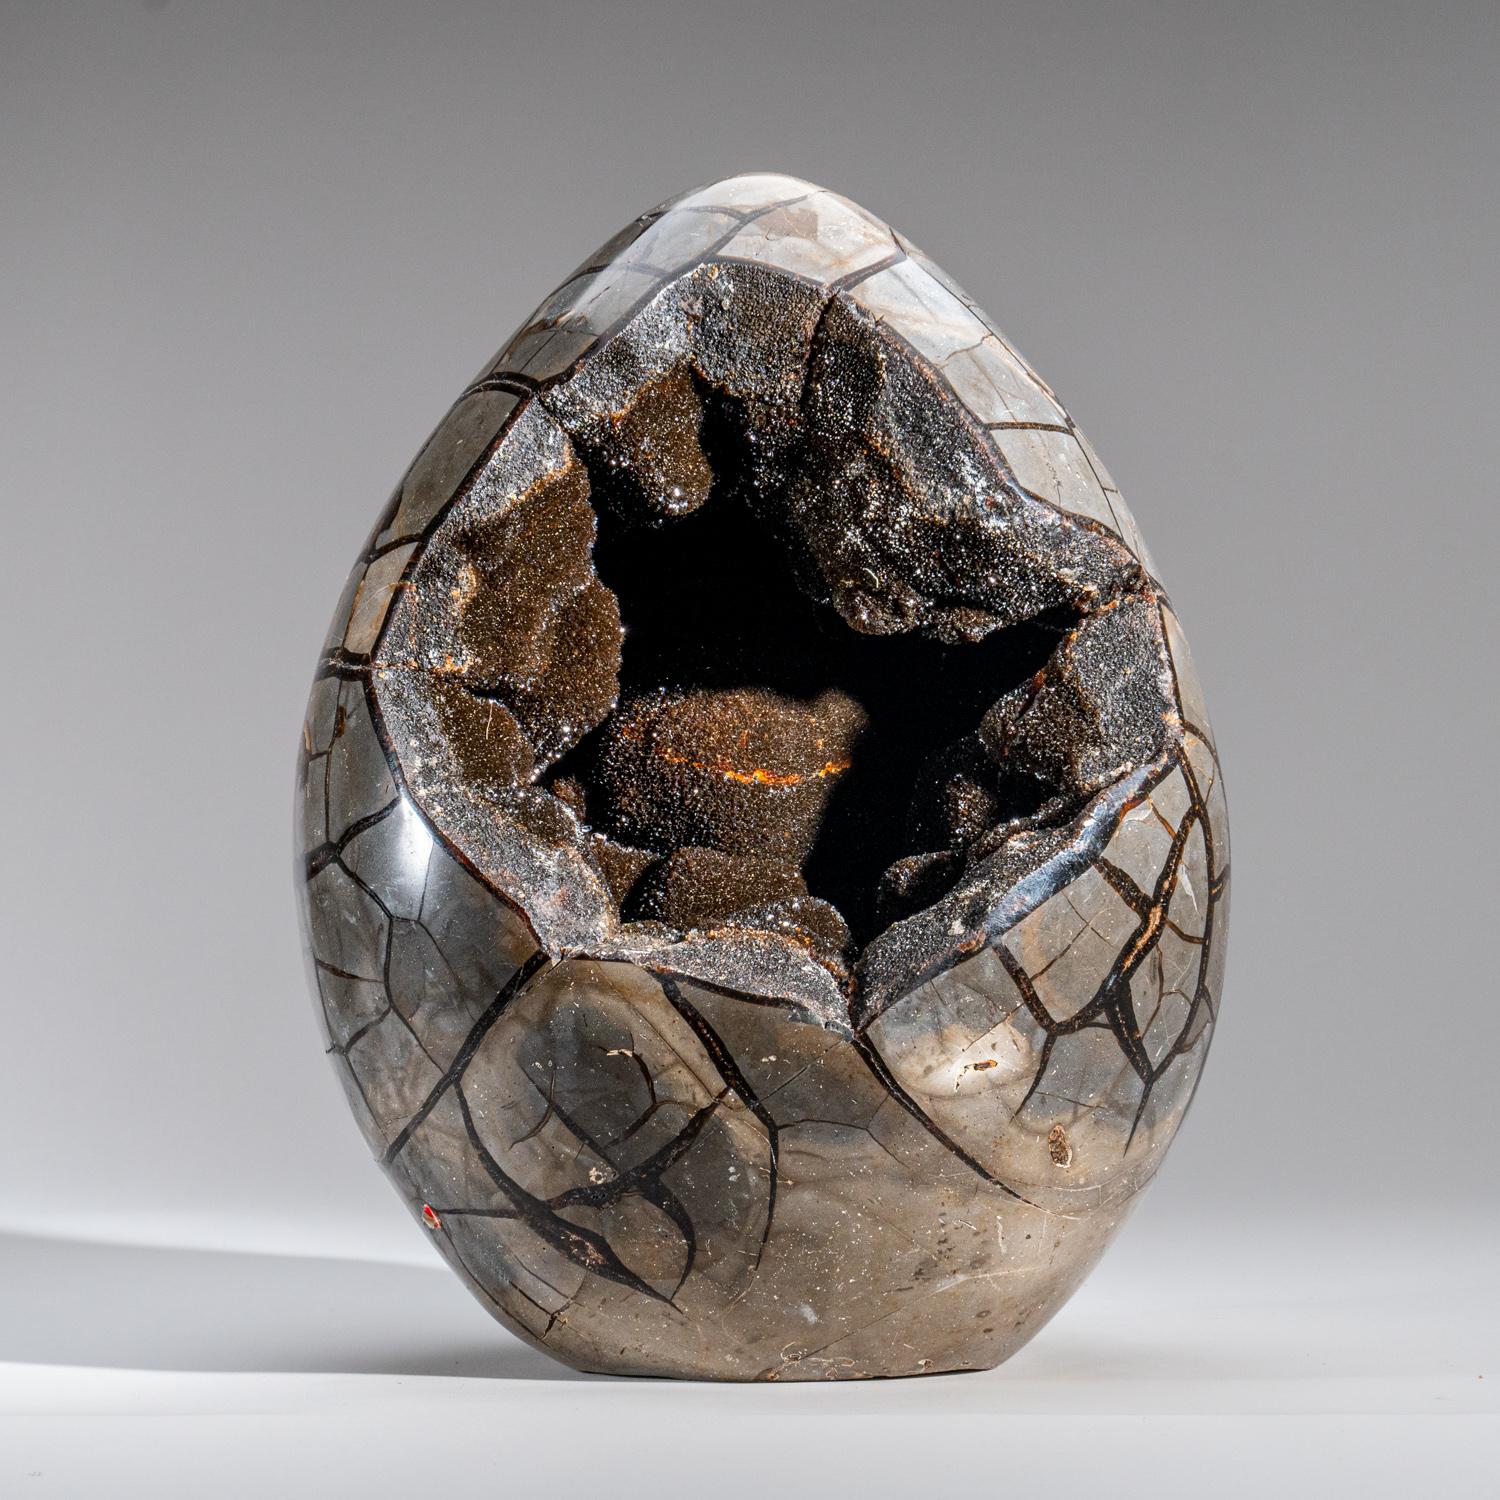 This 30 lb AAA quality polished geode egg with druzy inside from Madagascar features an exposed area lined with dazzling druzy quartz crystals, as well as a polished back side, providing a high reflective surface. Septarian is a combination of